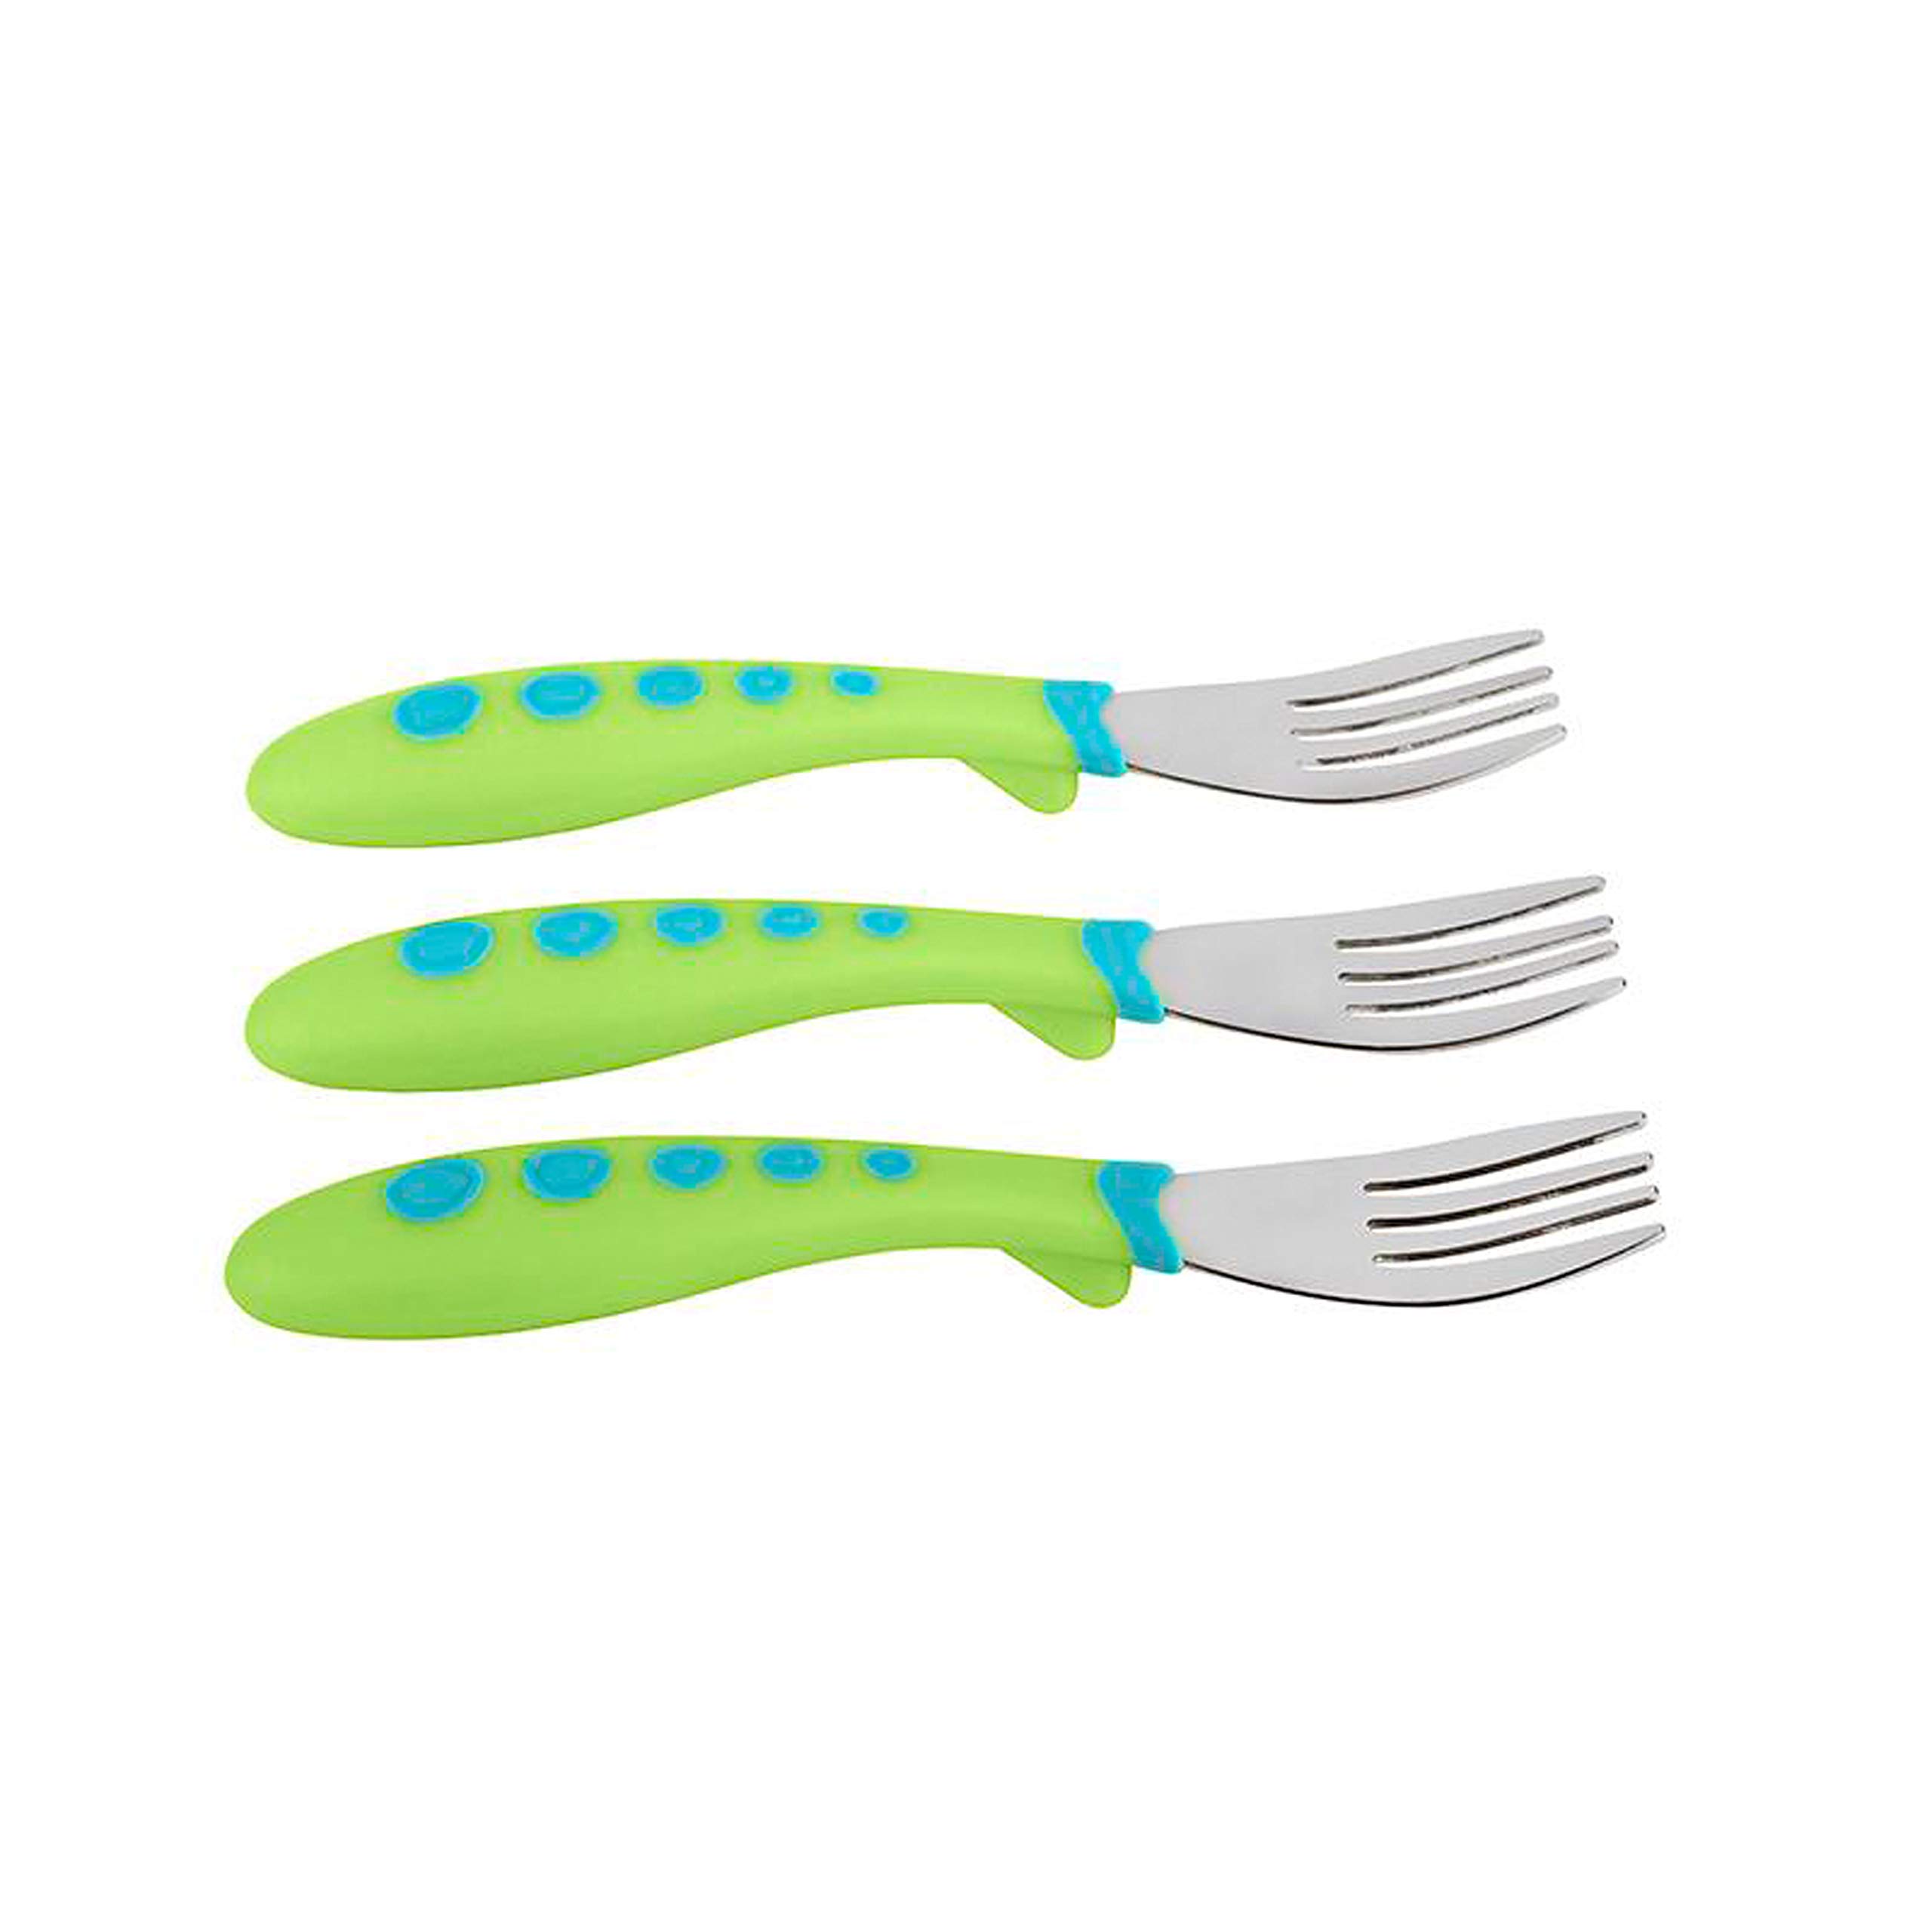 NUK First Essentials Kiddy Cutlery Forks, 3-Count (Color May Vary)